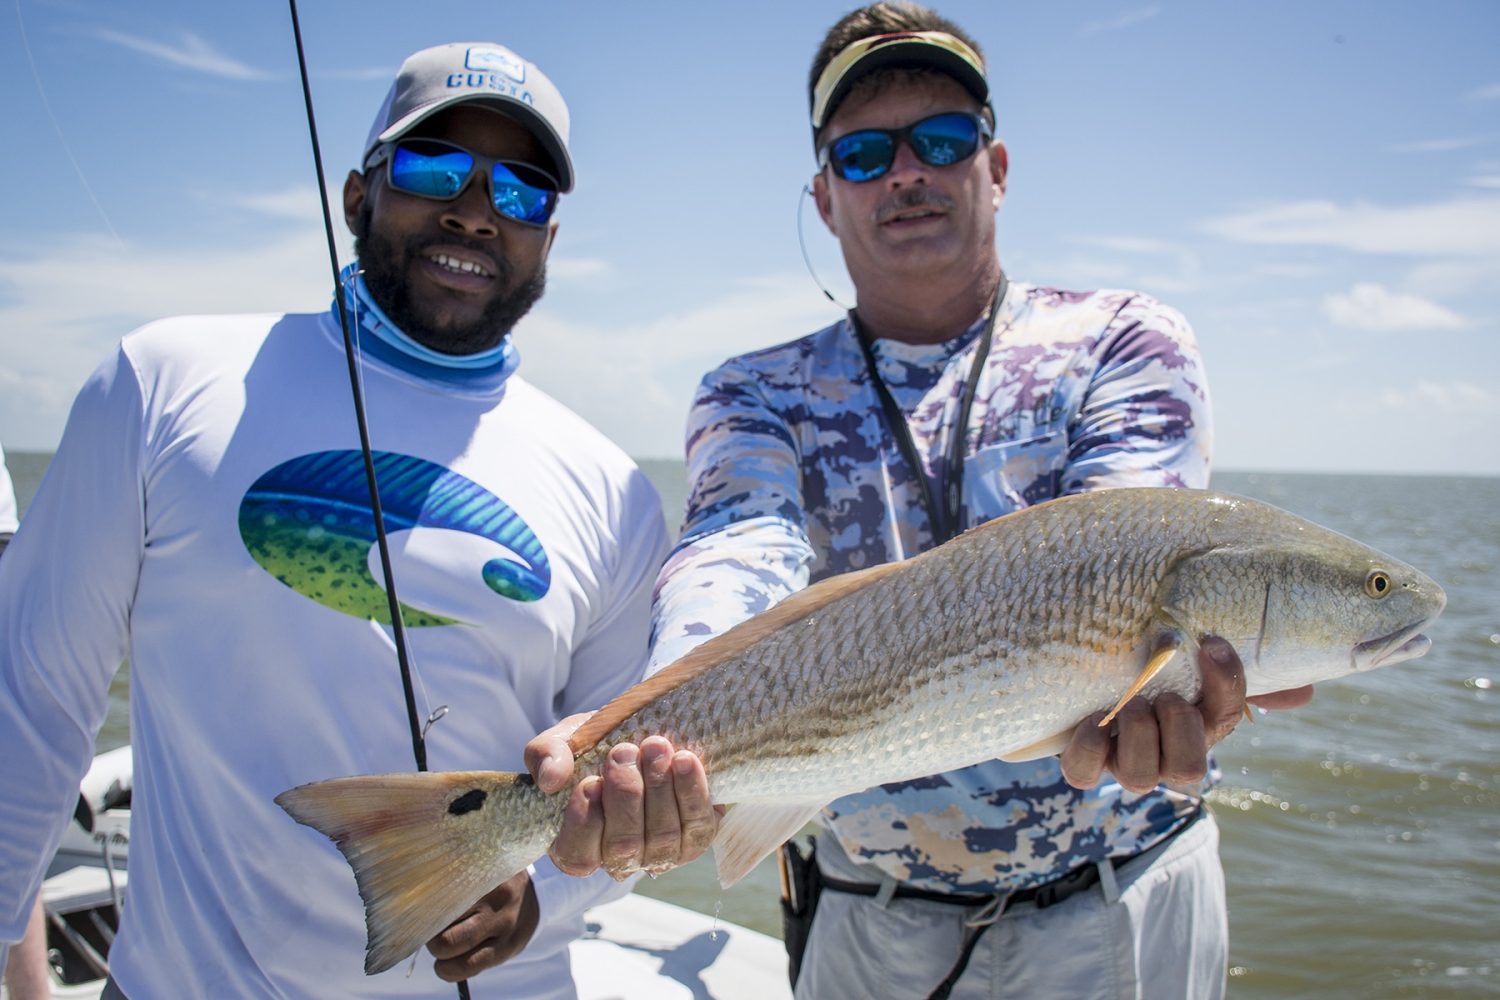 The Texas Billfish Classic invited Freedom Alliance veterans to participate in their annual tournament. Read the full story >>